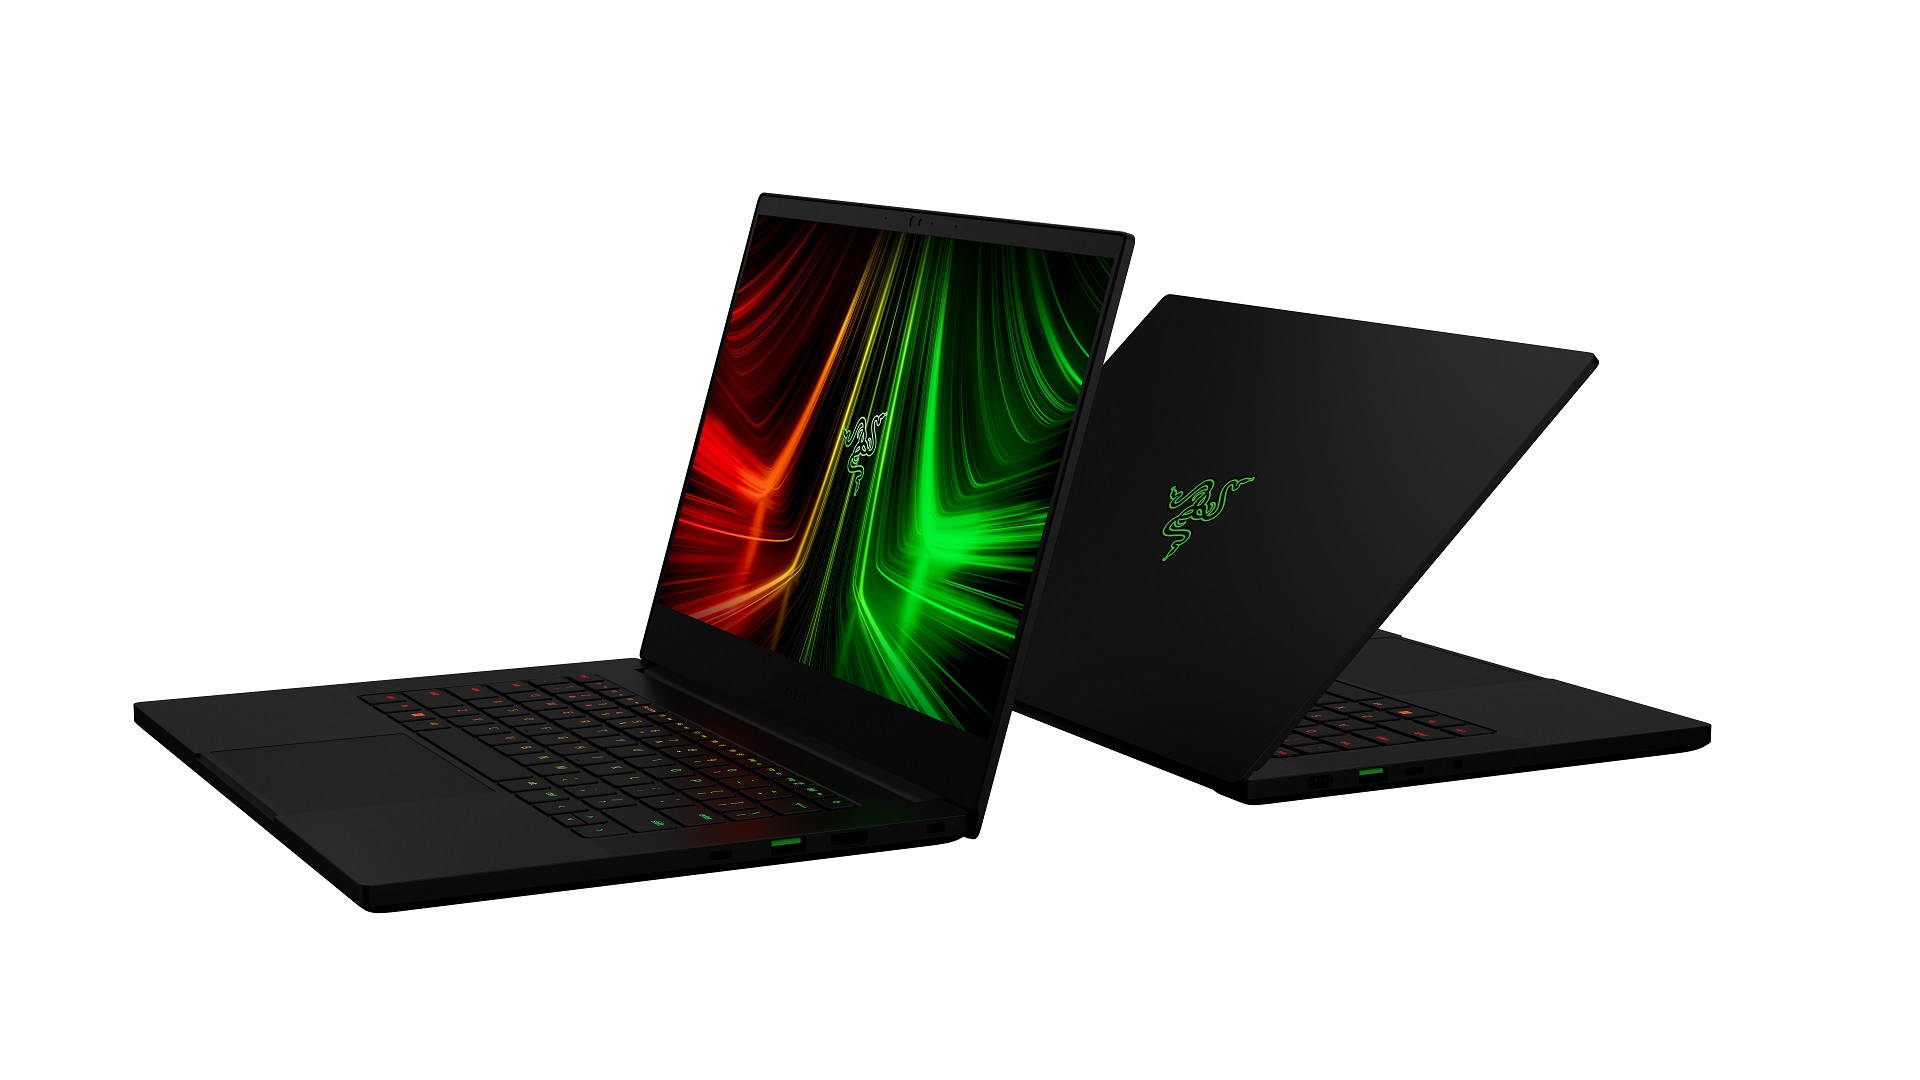 Your Razer Blade experience just got sharper with these accessories